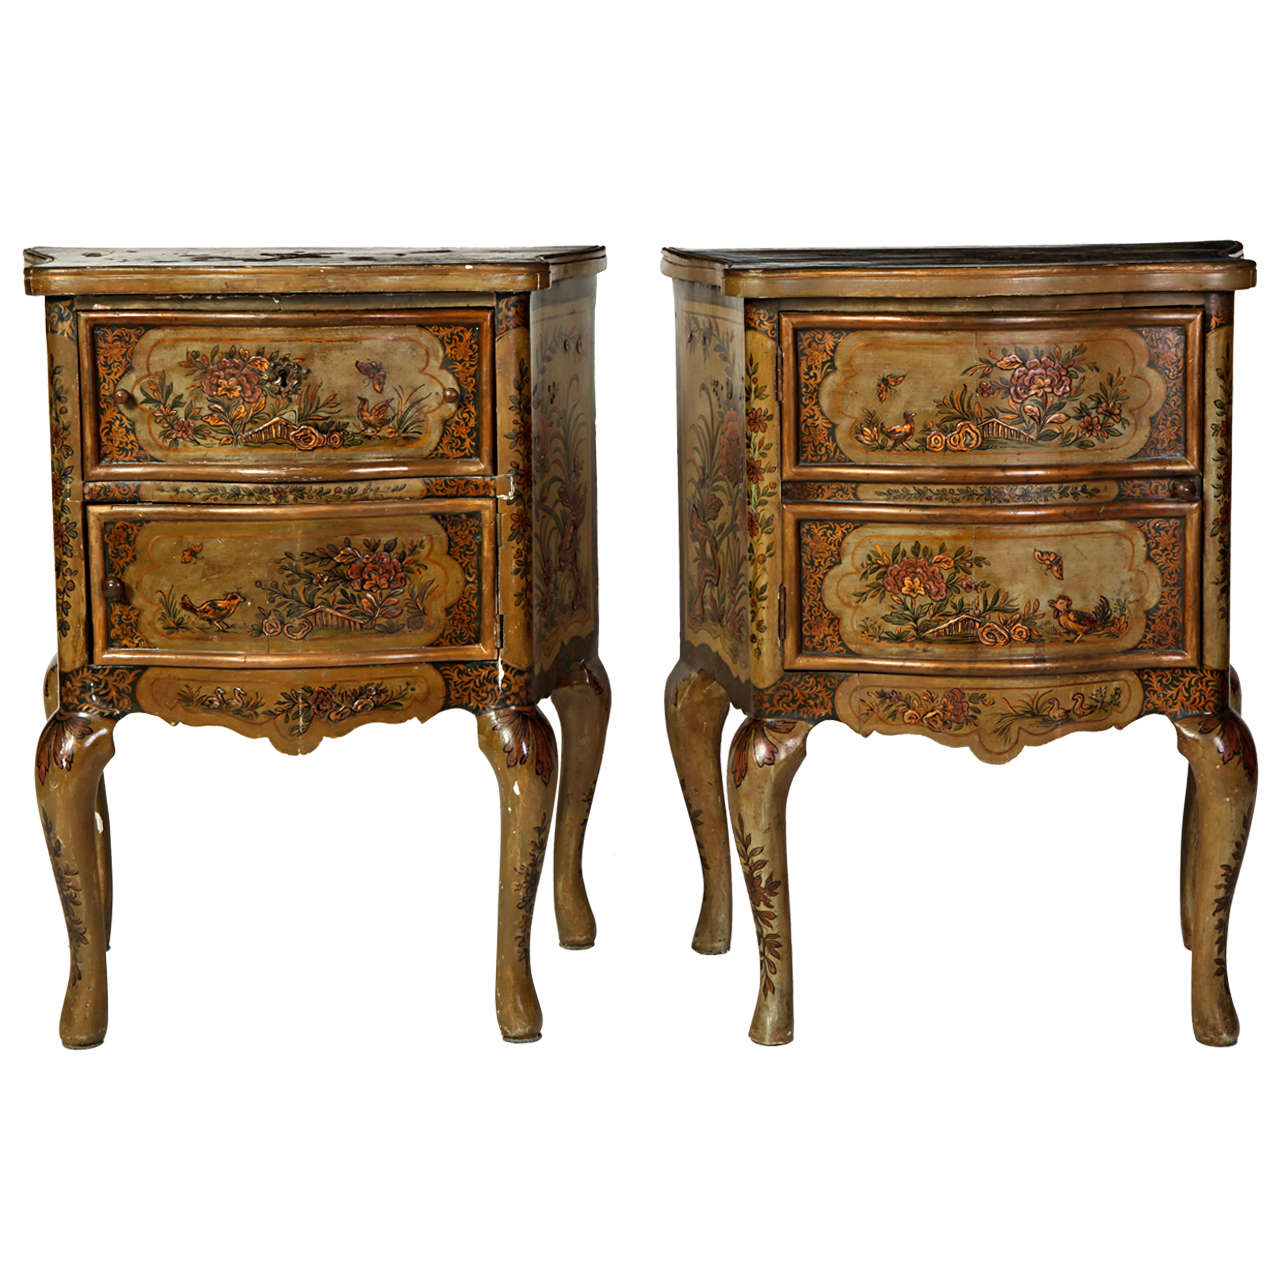 Pair of Small Italian Lacquered Commodes 19' century For Sale